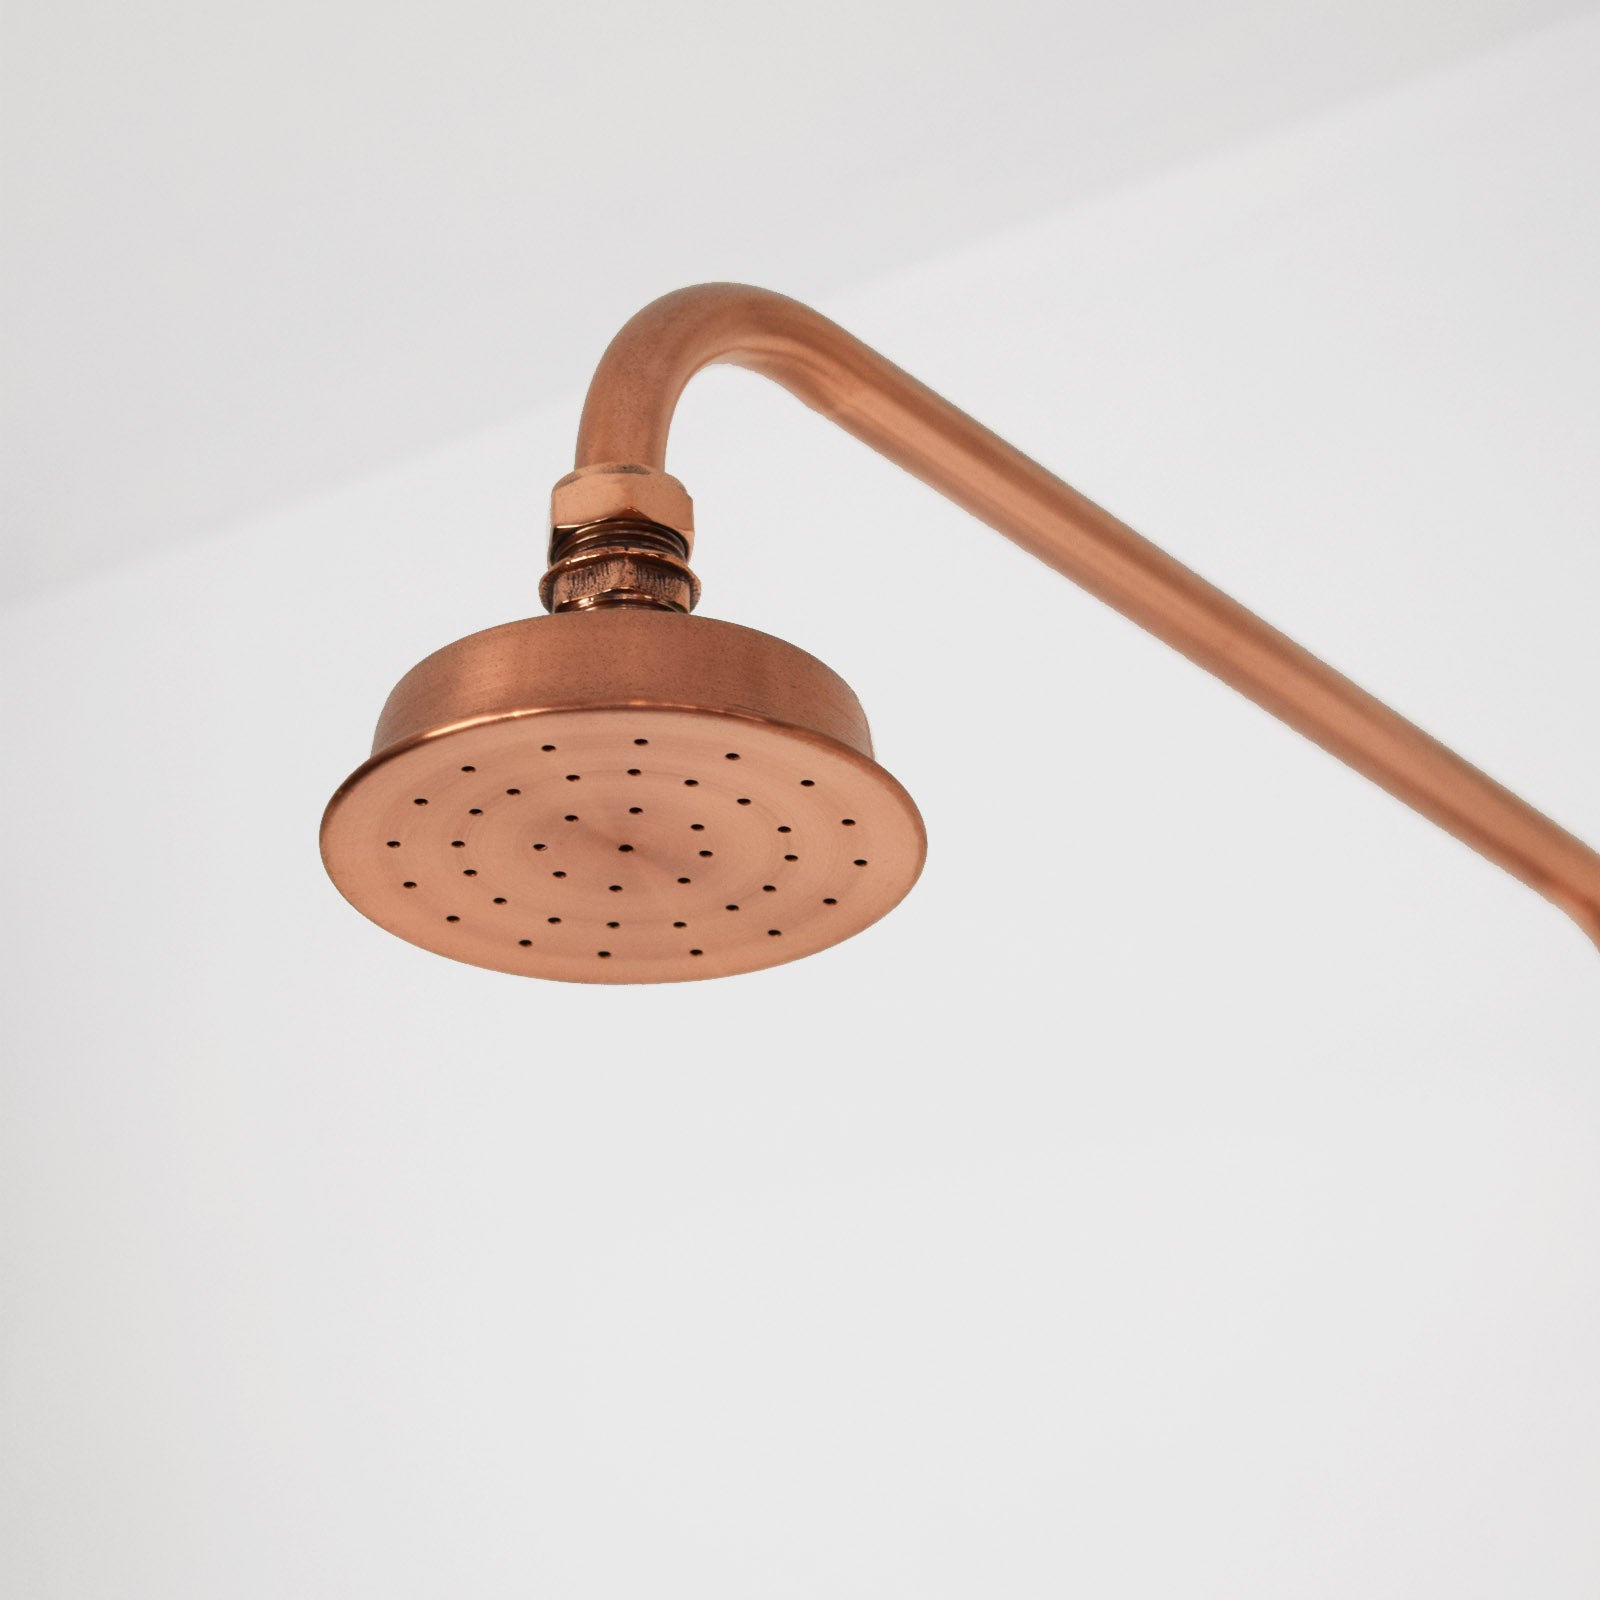 long-lasting showers with our genuine copper shower heads